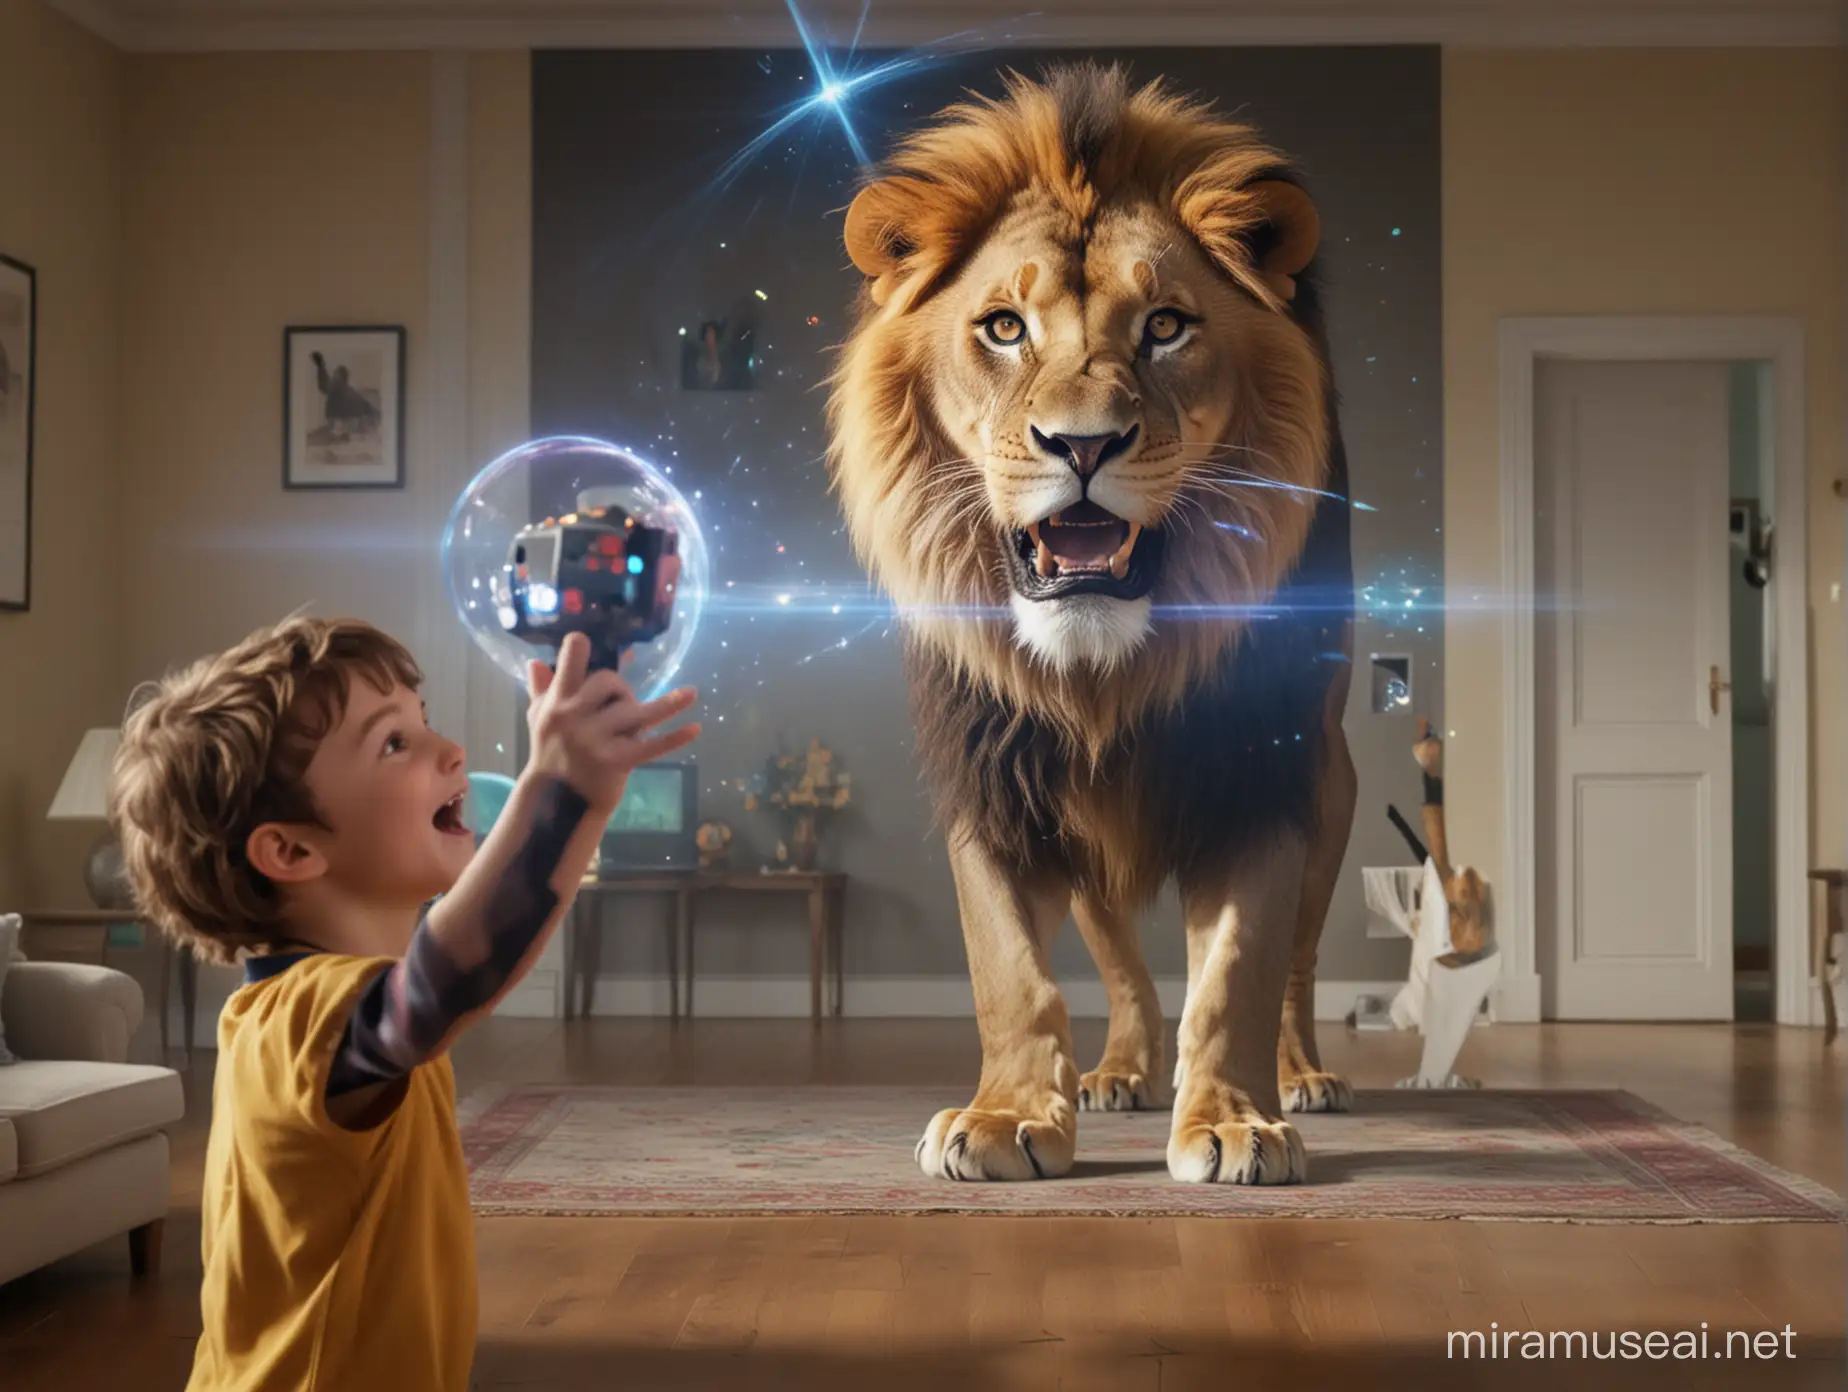 Child Playing with Joystick in Lion Hologram Home Scene